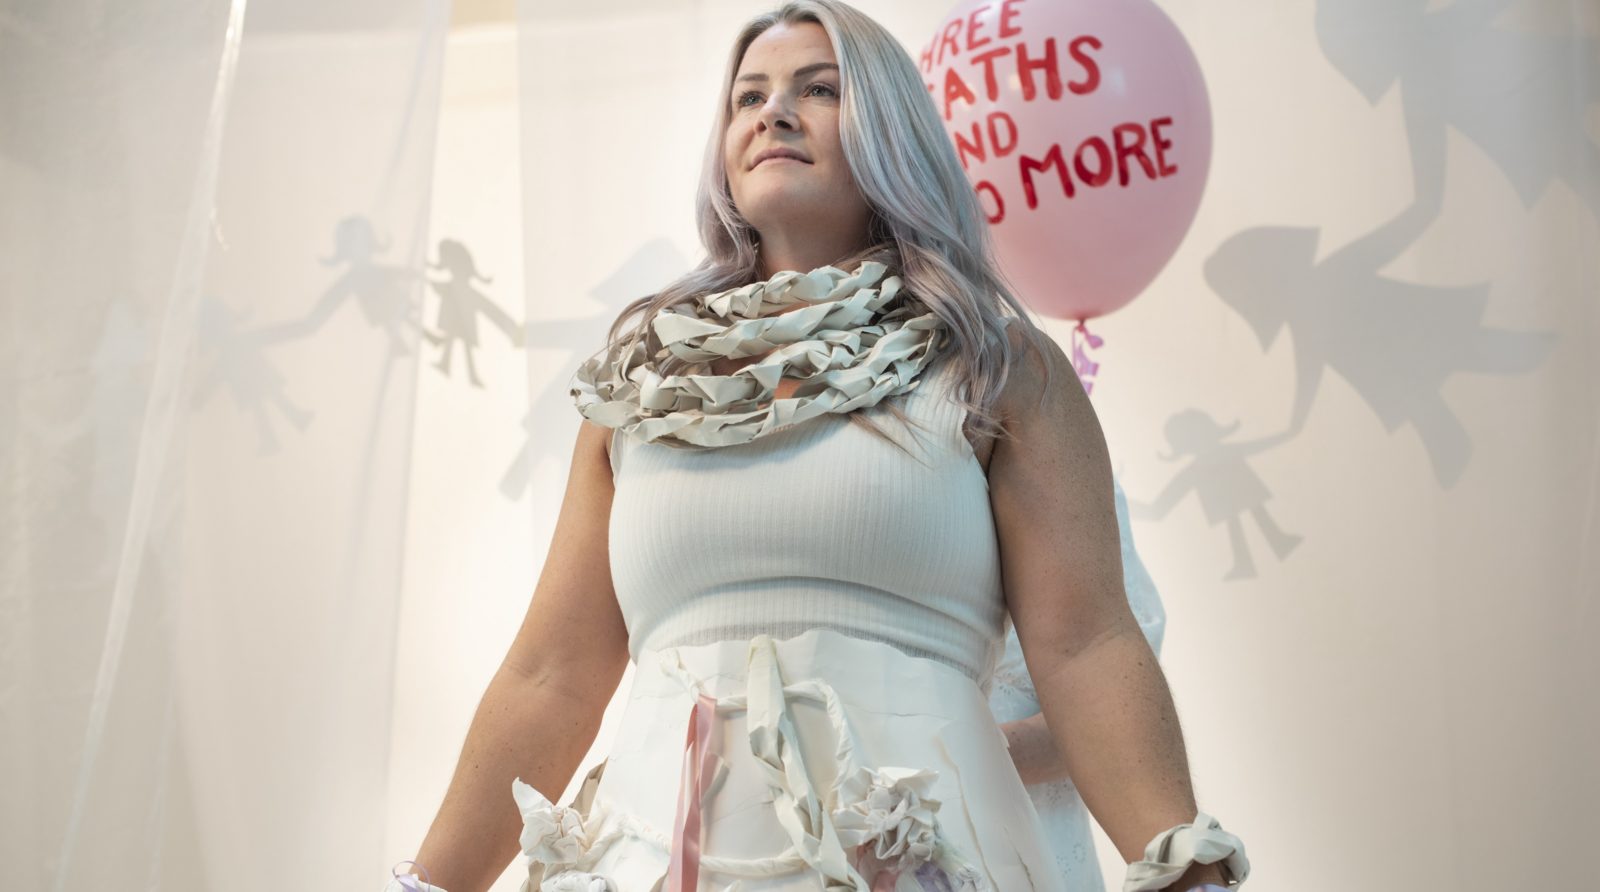 A woman with platinum hair stands upright with her arms by her side in a confident stance. She is smiling slightly and is wearing all white with some paper chains around her neck. Behind her are a string of paper dolls.